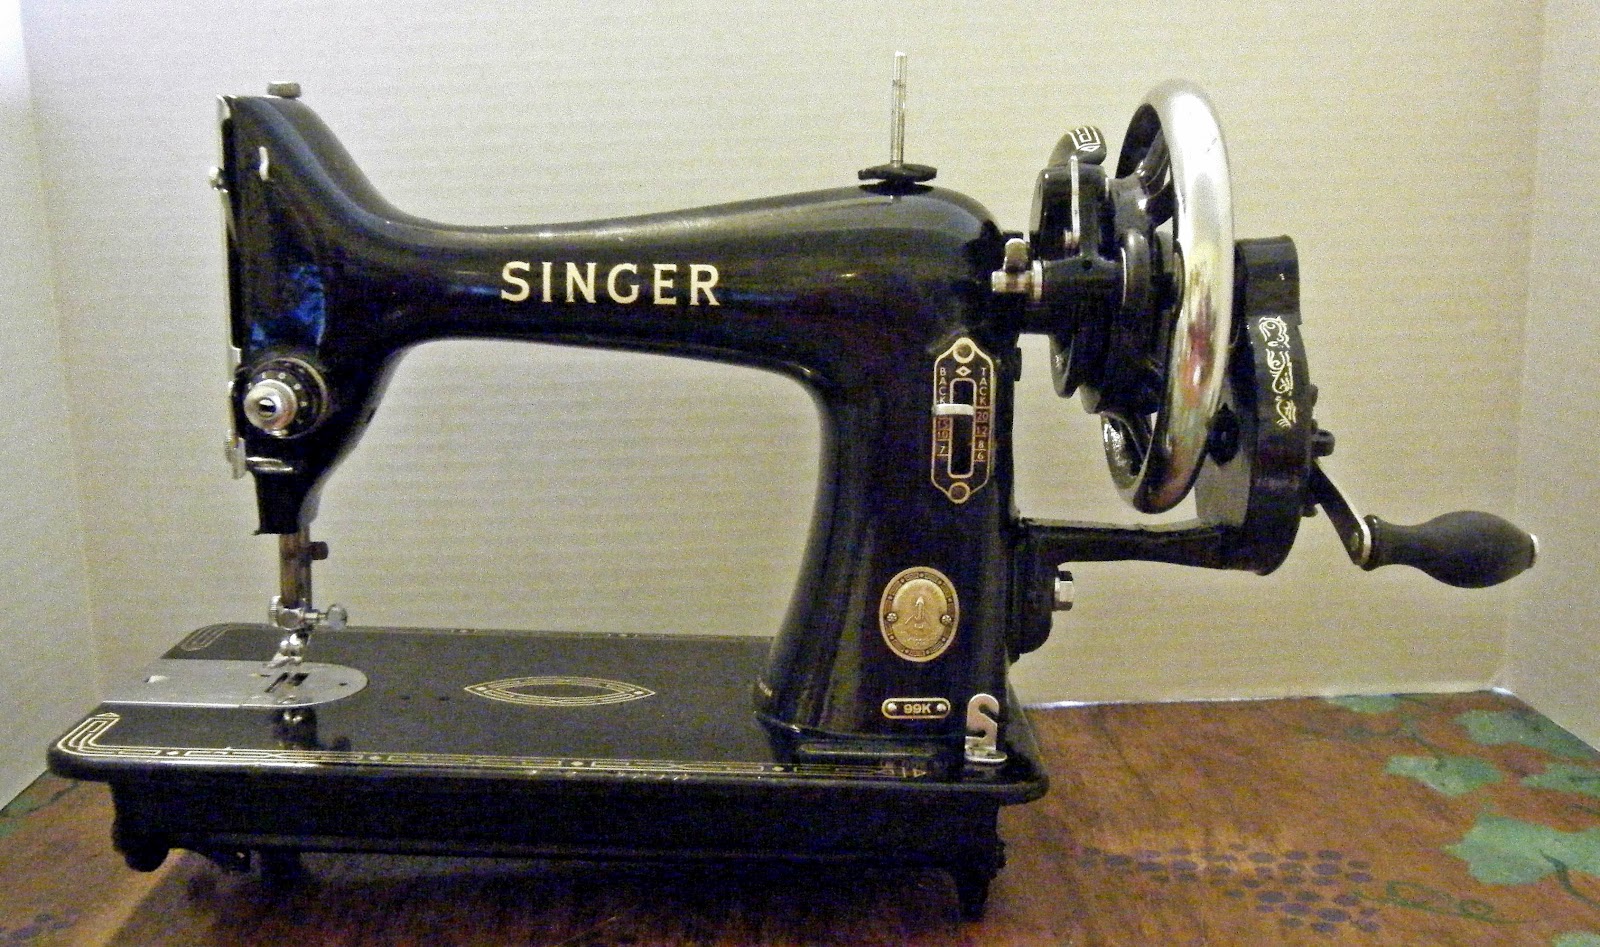 VTG 1934 SINGER Sewing Machine With Carry Case + Pedal PARTS